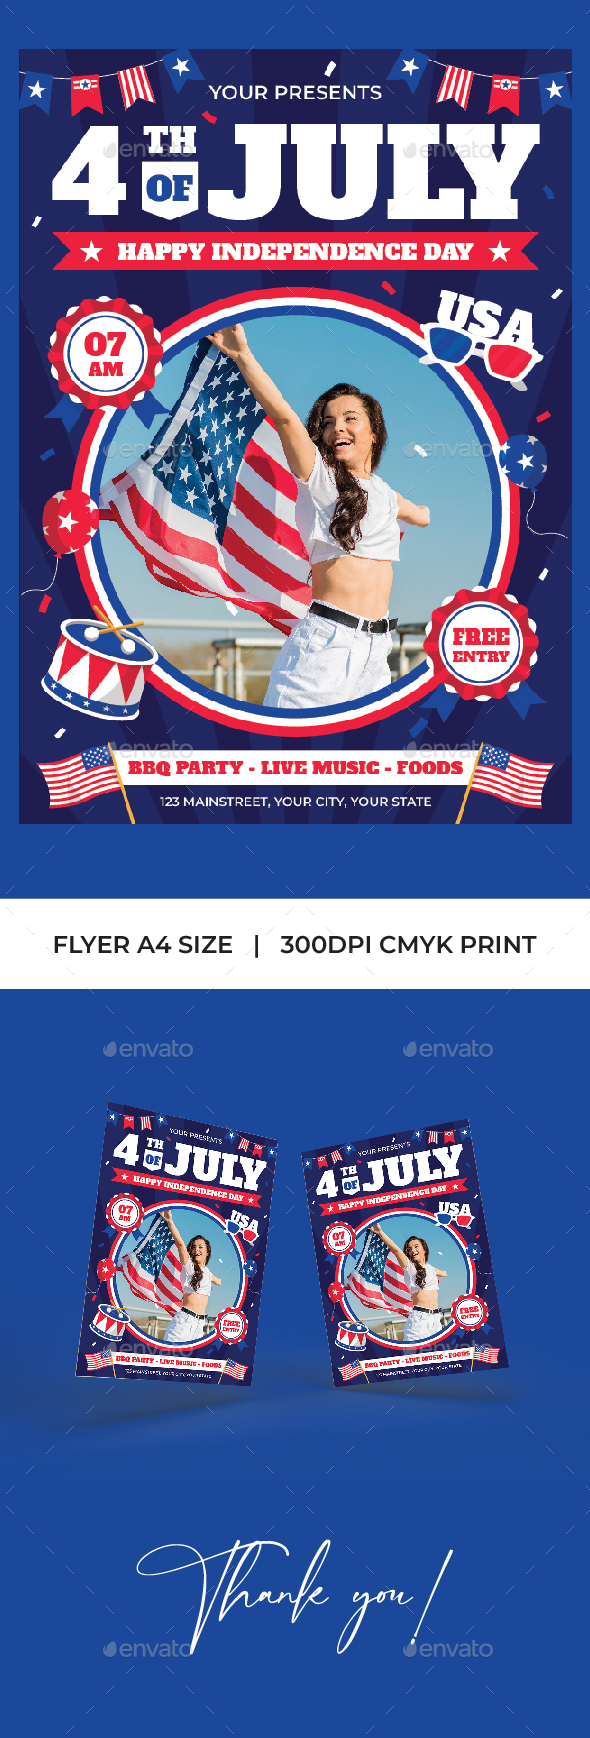 [DOWNLOAD]4th Of July Flyer